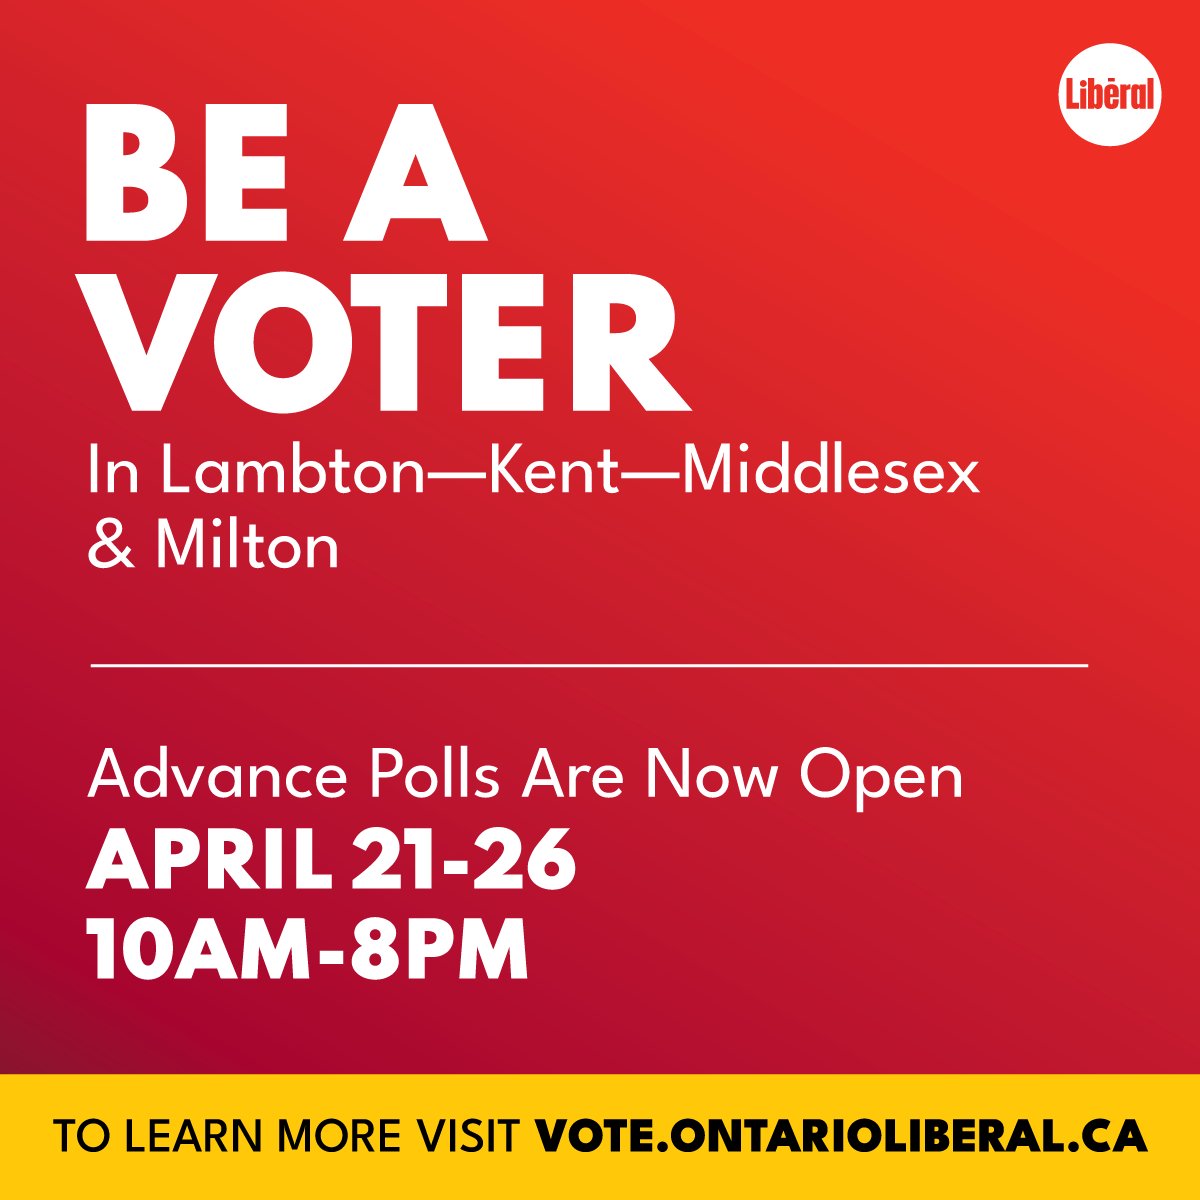 Advance Polls are now open in Lambton—Kent—Middlesex and Milton! Cast your ballot between 10 AM and 8 PM from April 21-26. It's fast and easy. 🗳 vote.ontarioliberal.ca